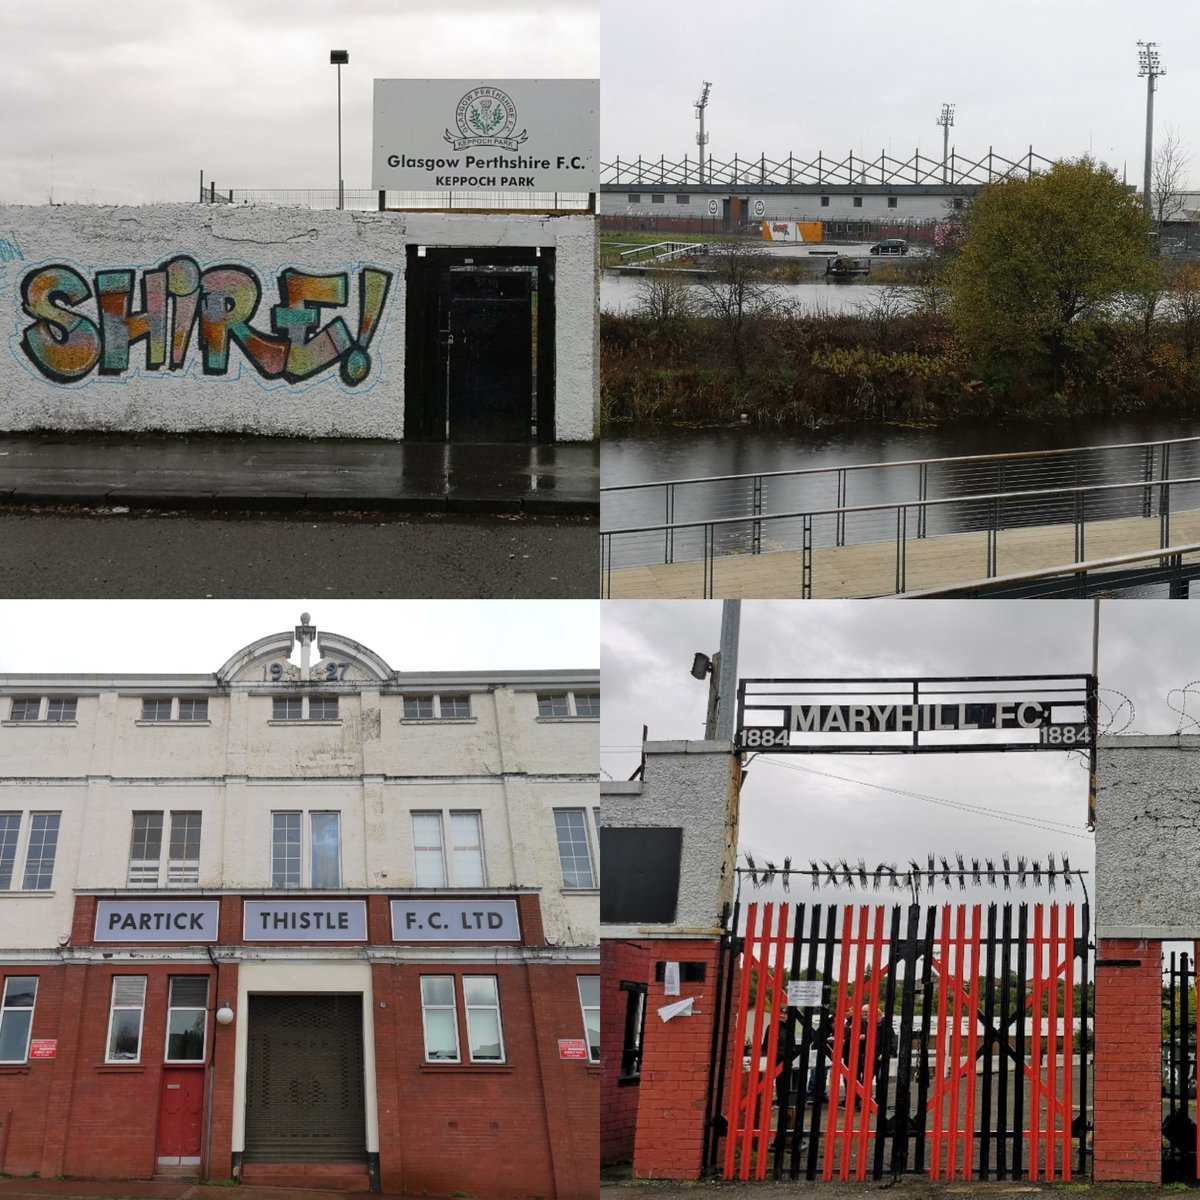 Now, past Keppoch Park, where Glasgow Perthshire FC to the epicentre of Glasgow footballing pain, Firhill Stadium. From Partick Thistle's ground it's just a short trot along the canal to Lockburn Park, where Maryhill FC play, the first team I was taken to watch as a child. 6/7